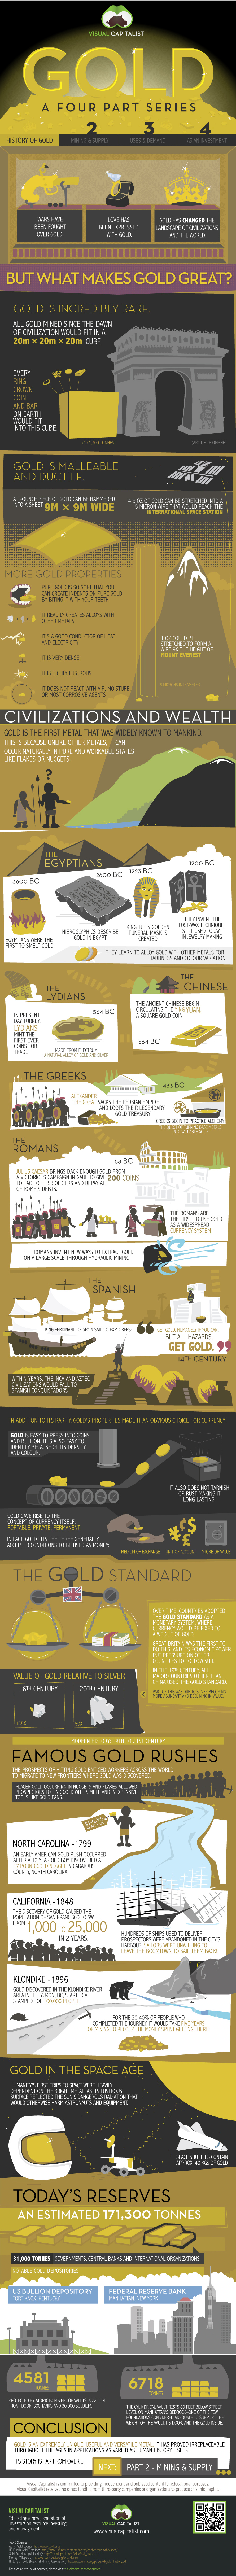 History of Gold infographic